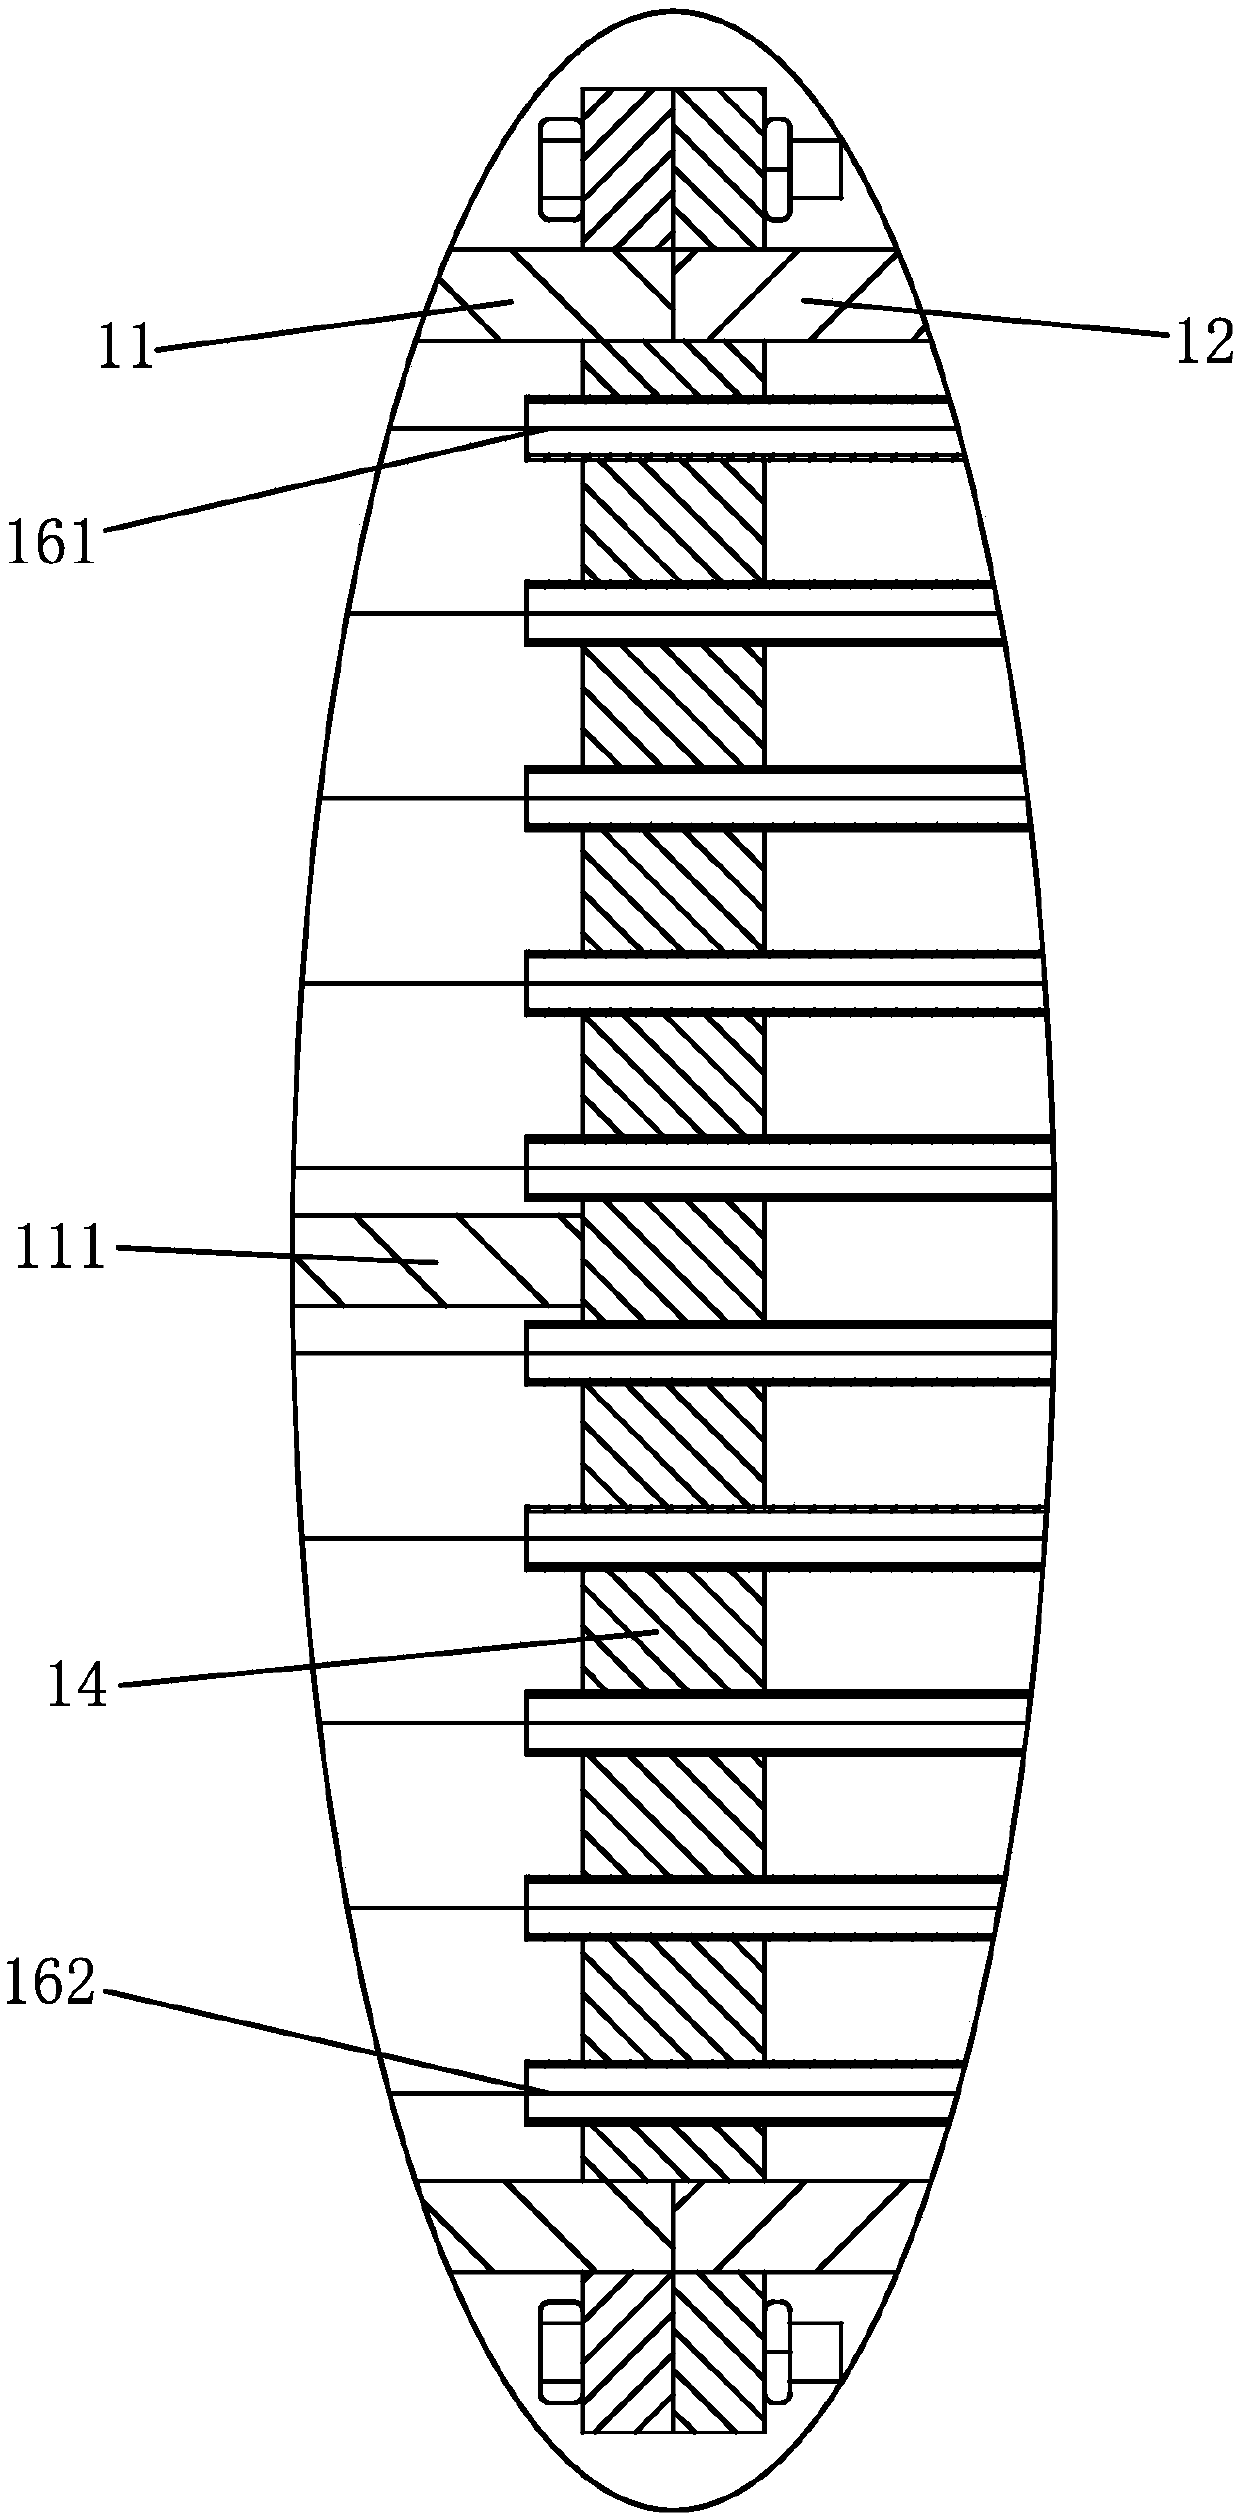 Chemical heat exchange device